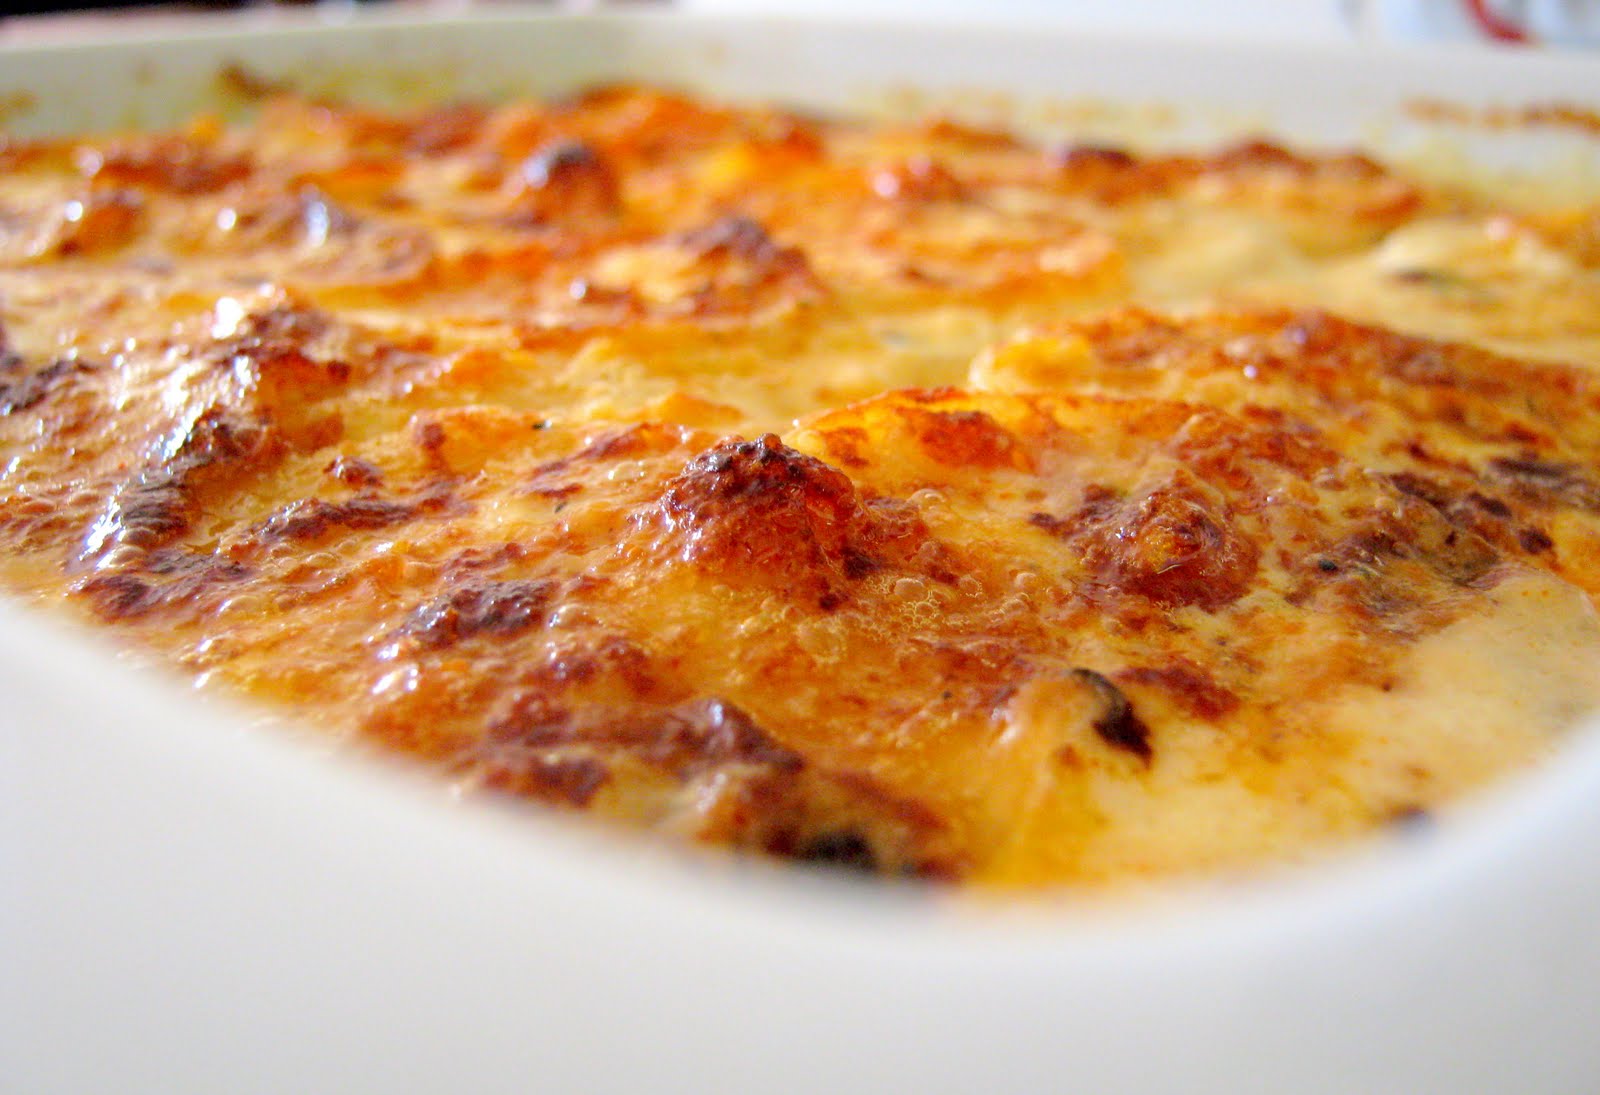 Barefoot Contessa Scalloped Potatoes Au Gratin View top rated barefoot ...